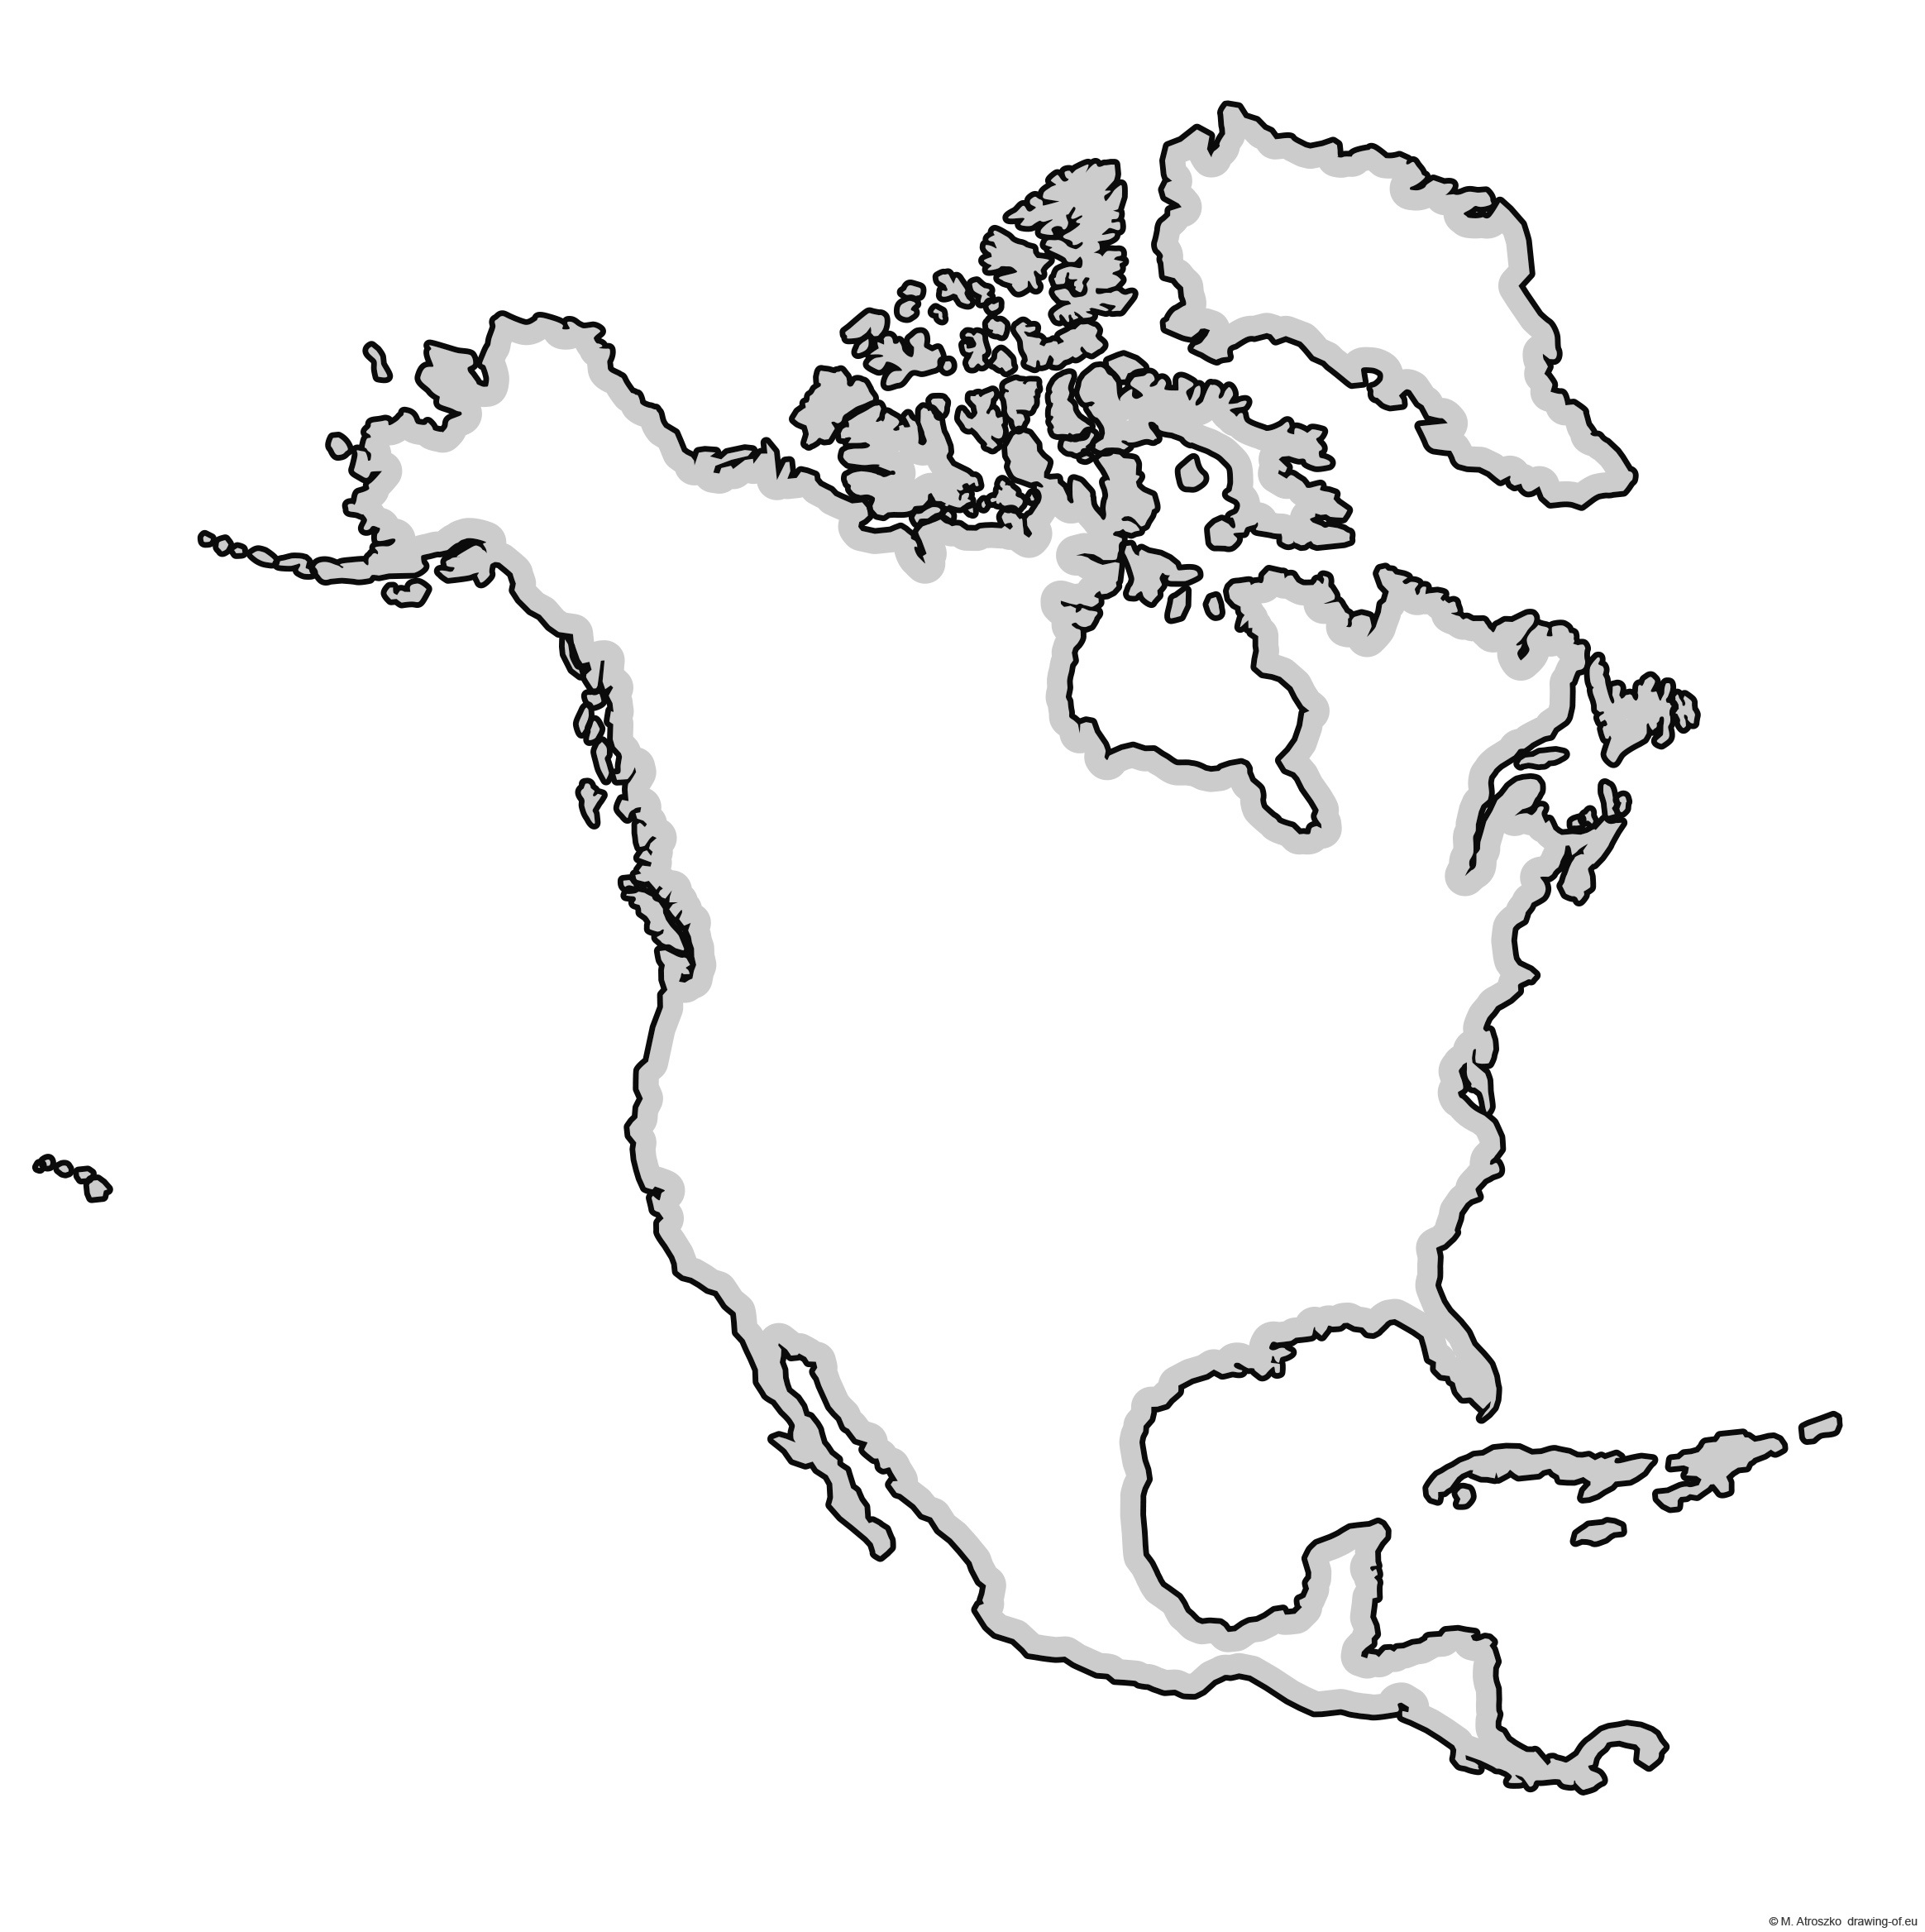 North America map for printing